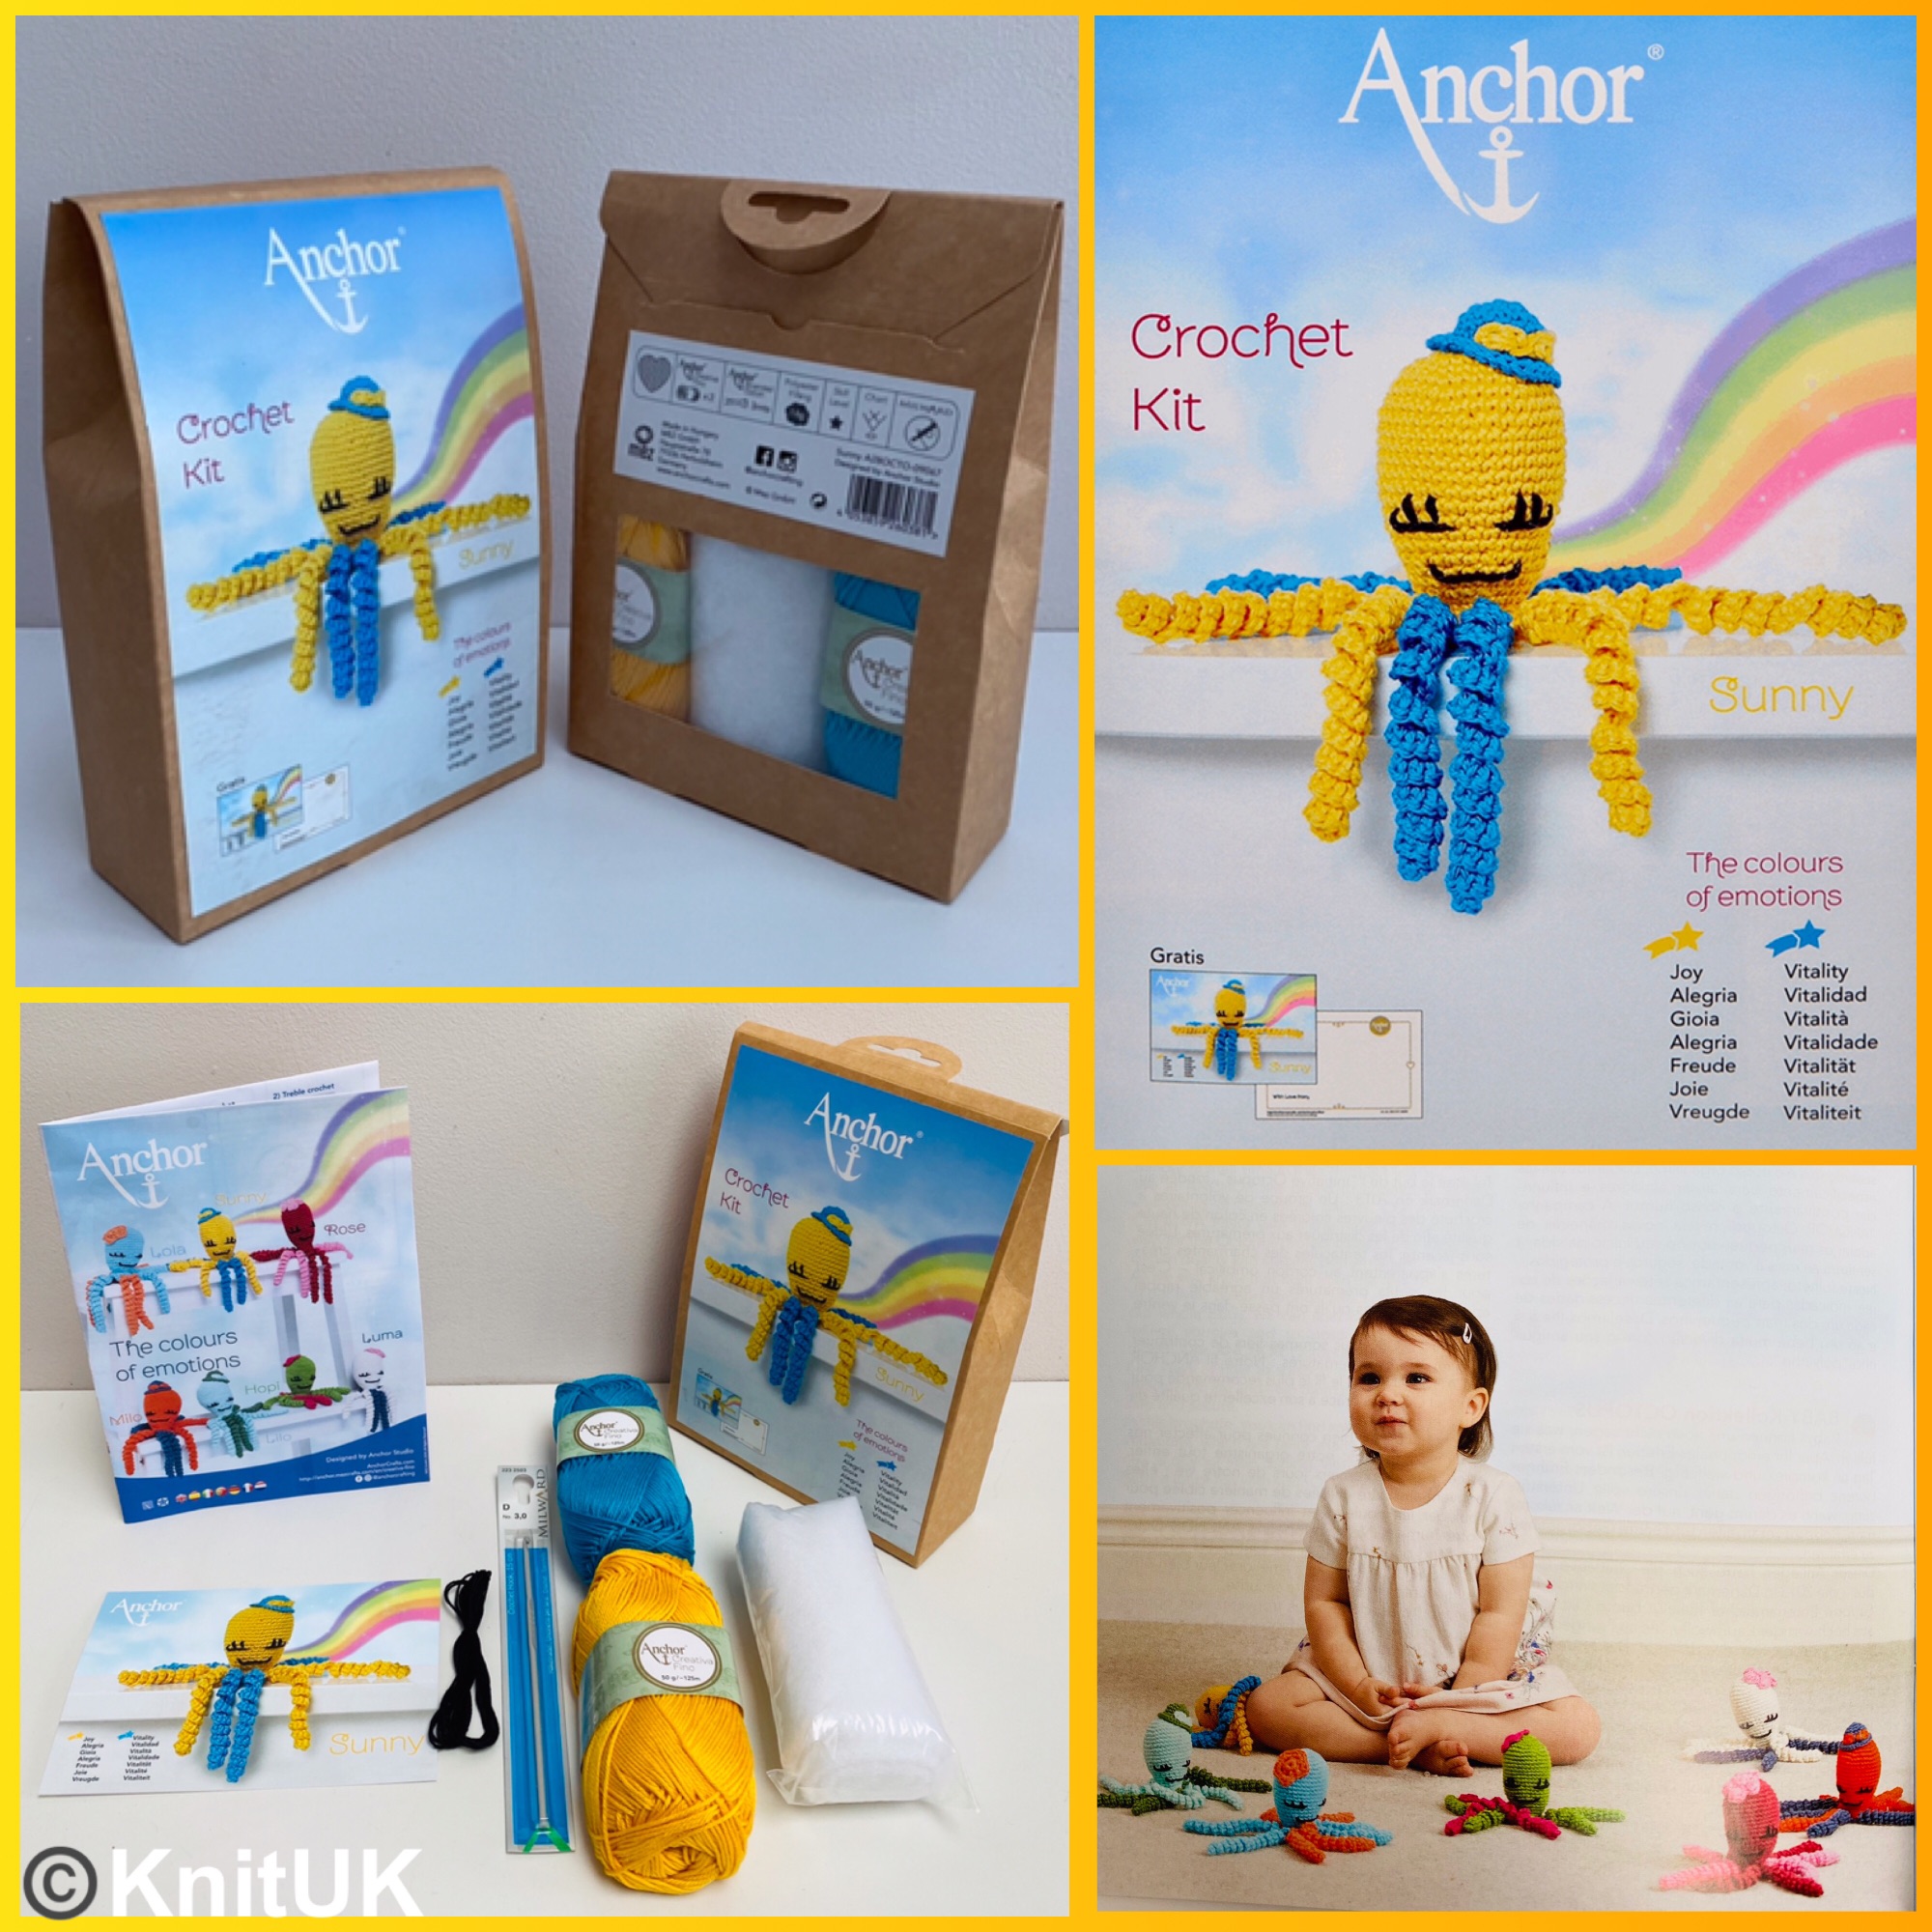 Anchor crochet kit octopus Sunny the colours of emotions with creativa fino